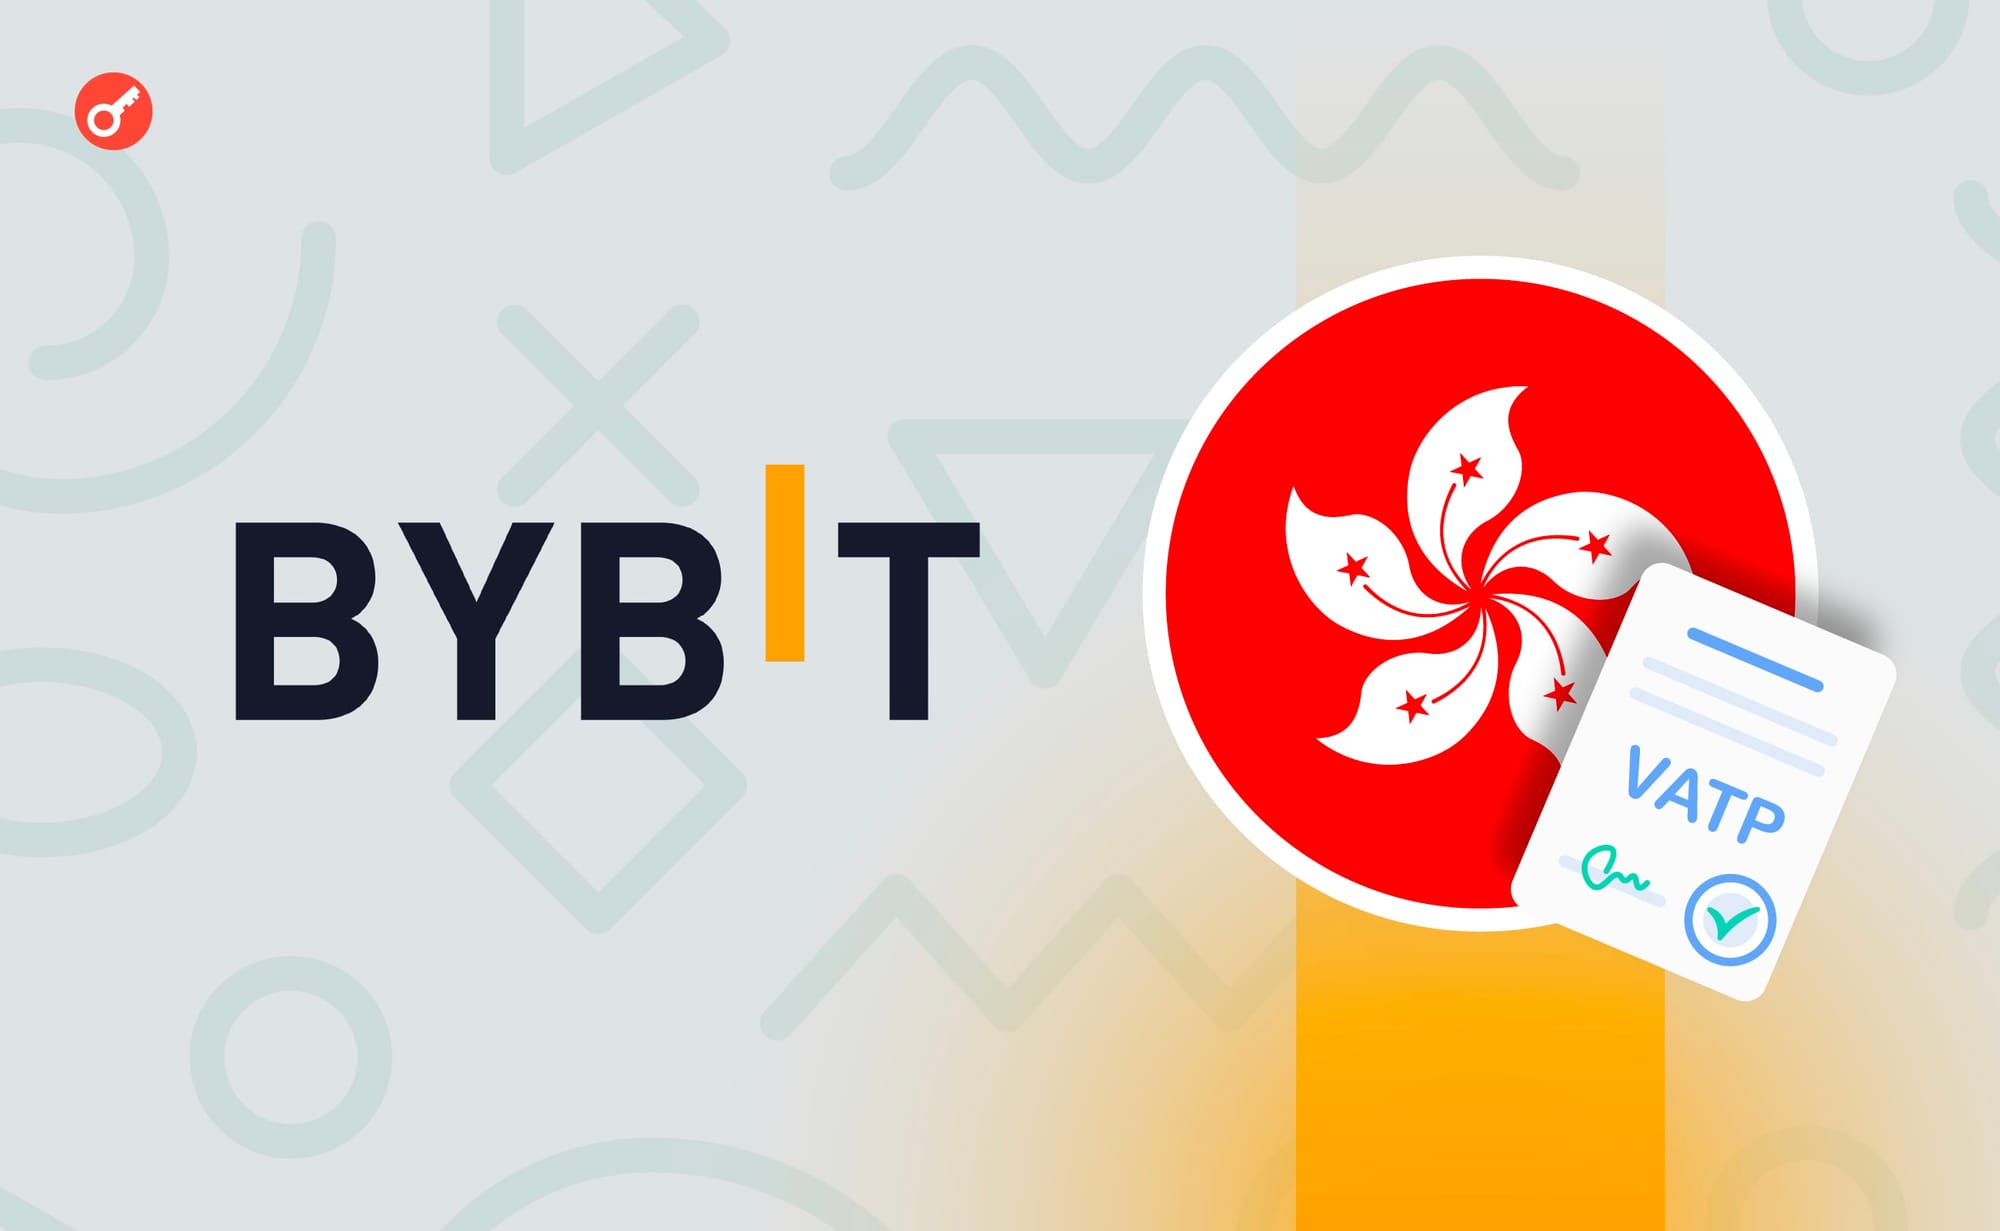 The Hong Kong regulator has added 11 products of the Bybit exchange to the list of suspicious investments